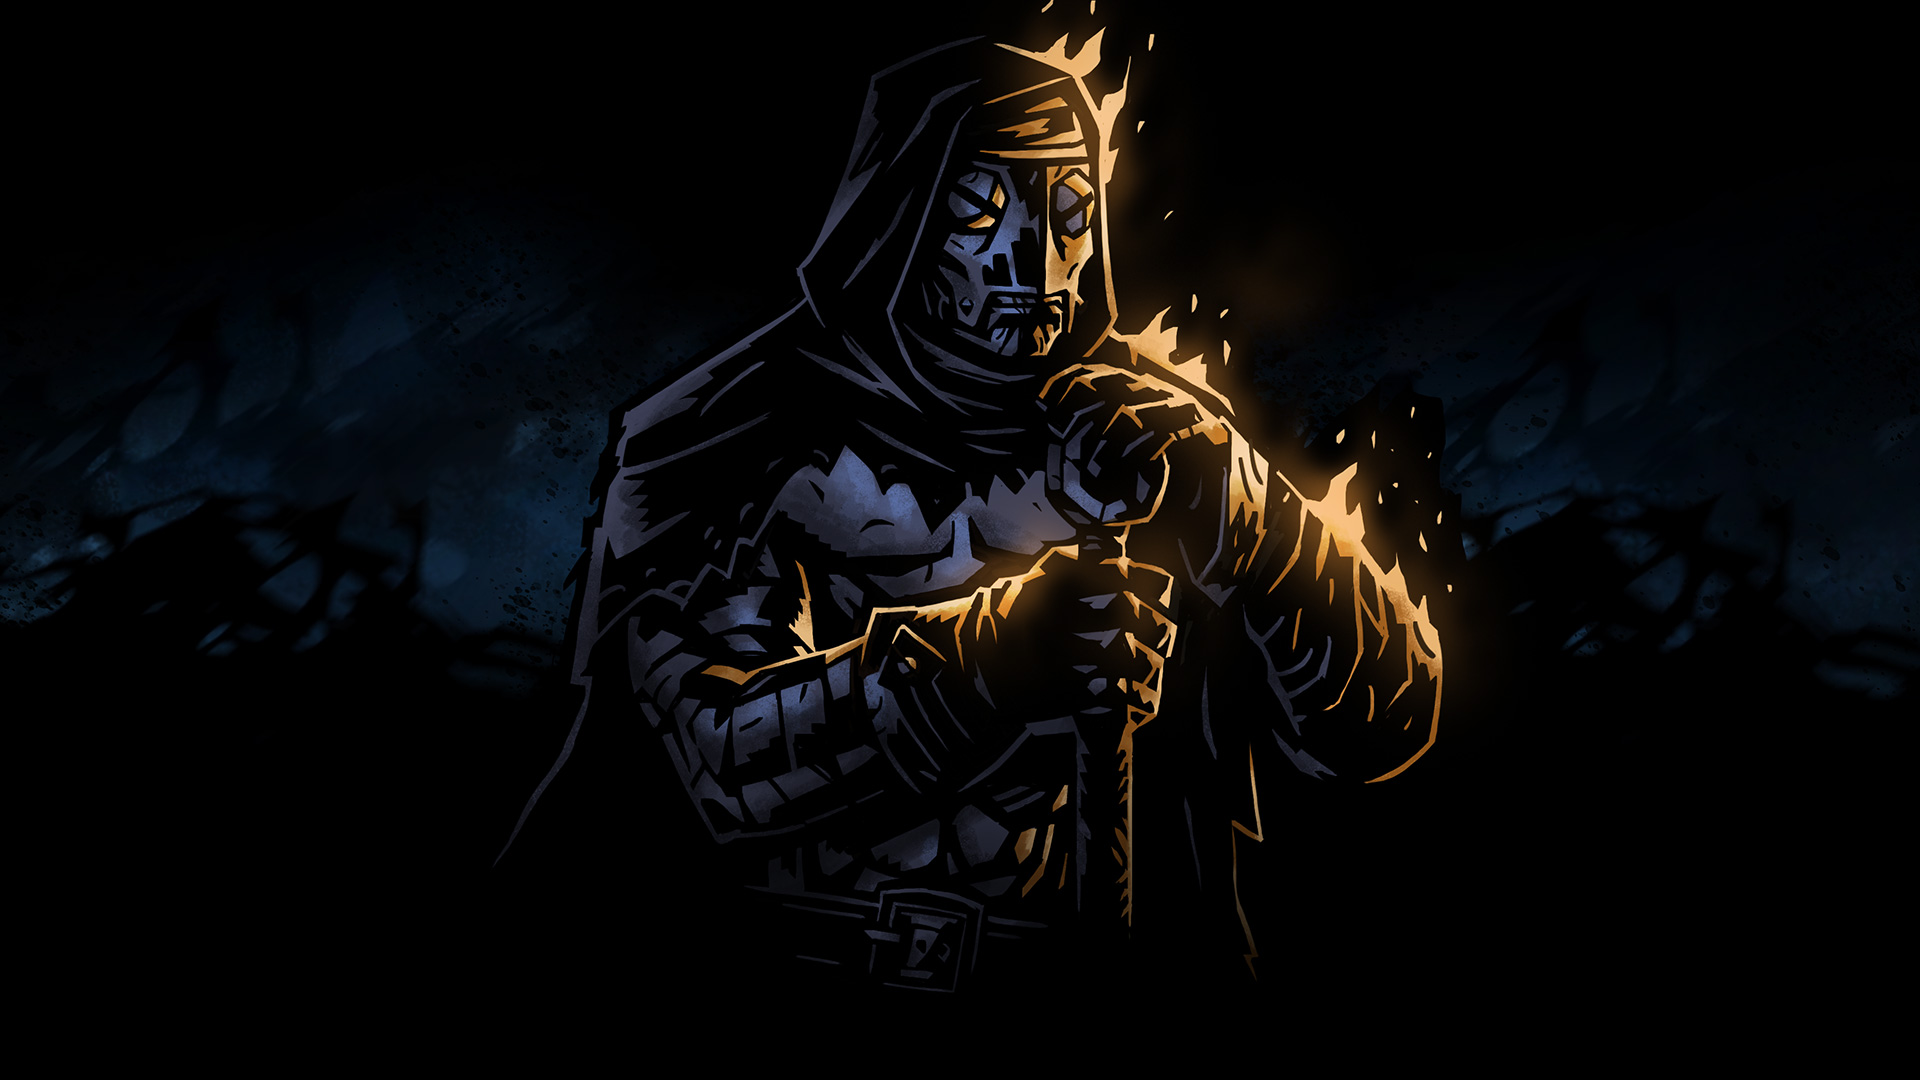 Made some Hamlet wallpapers in many stages of upgrading  rdarkestdungeon